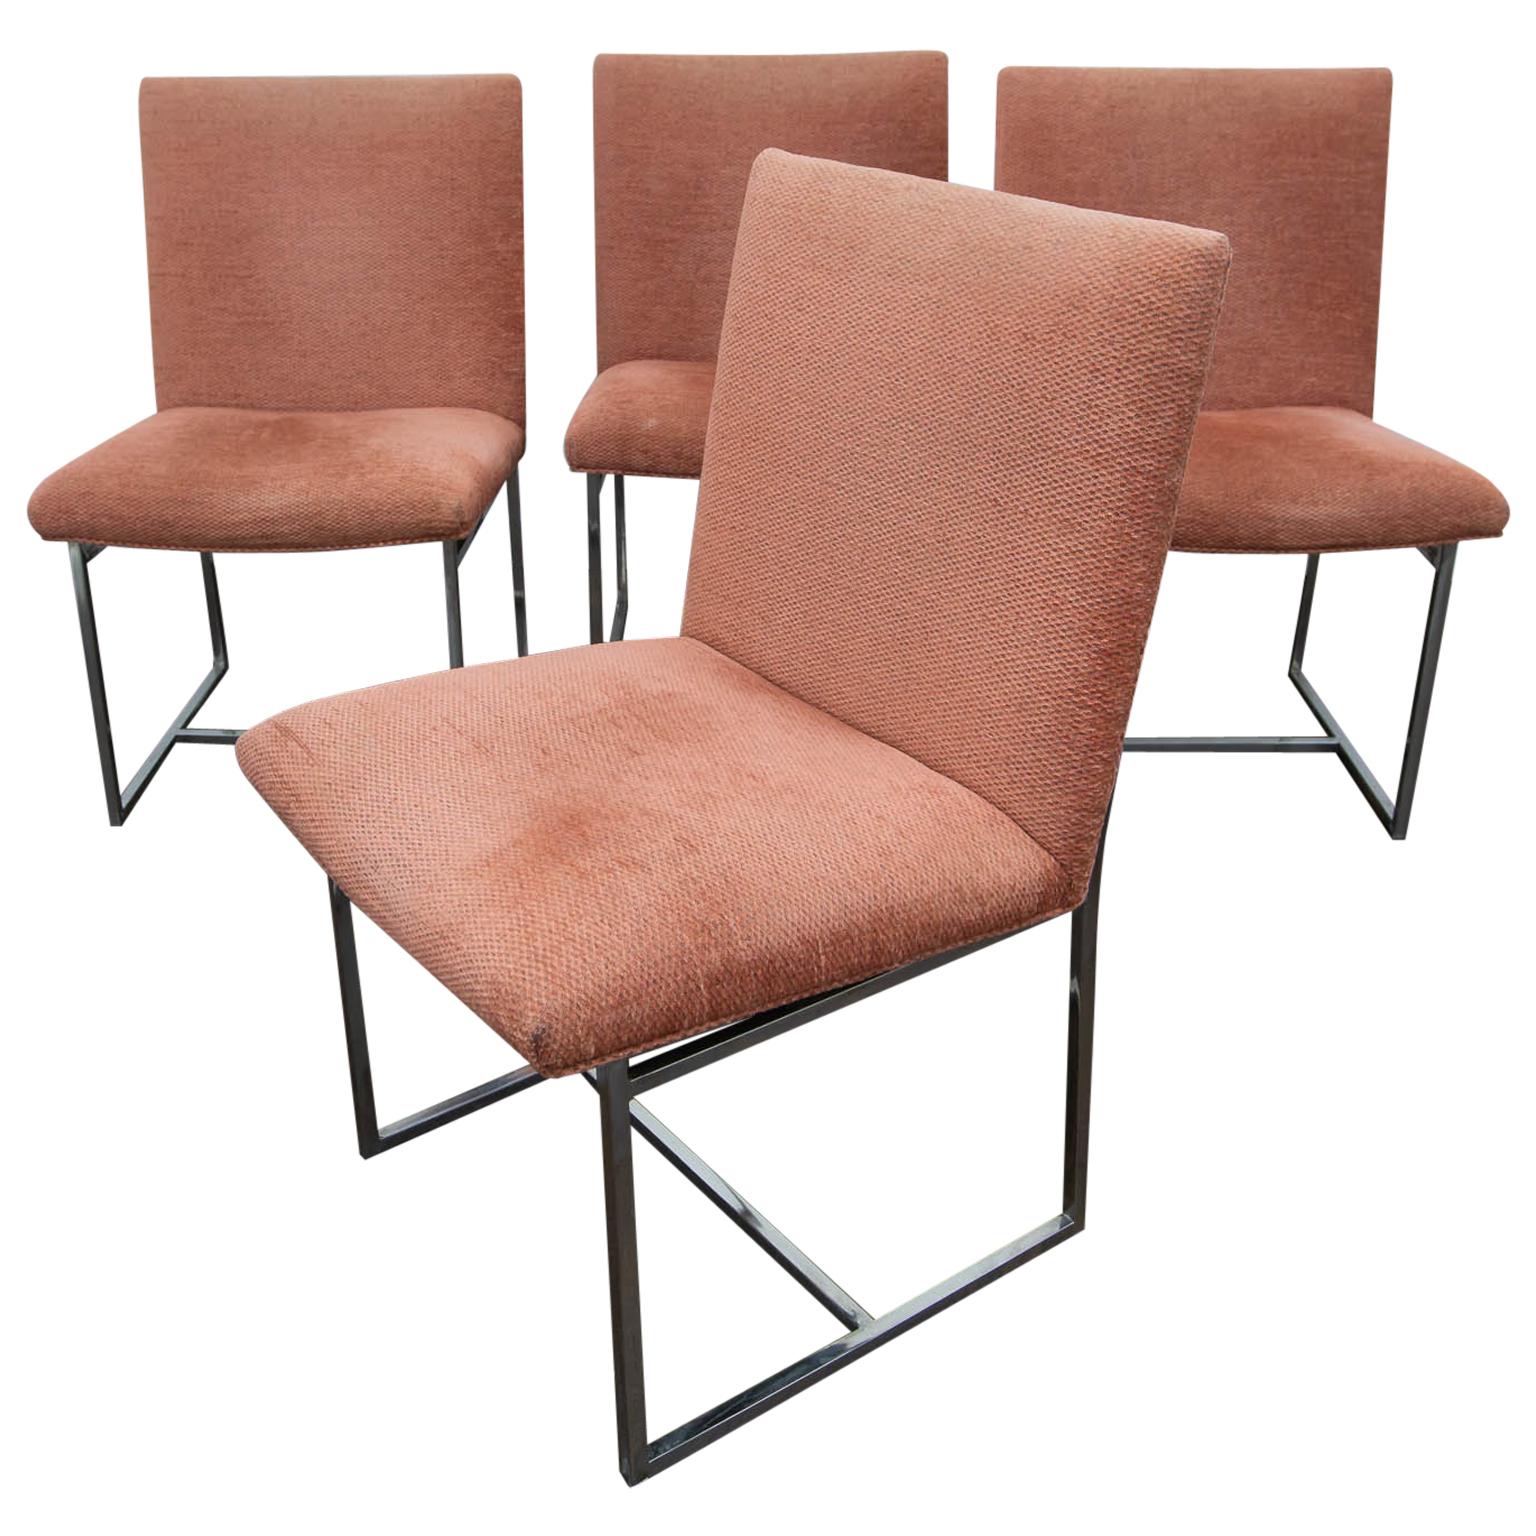 Set of 4 Milo Baughman Style Dining Chairs